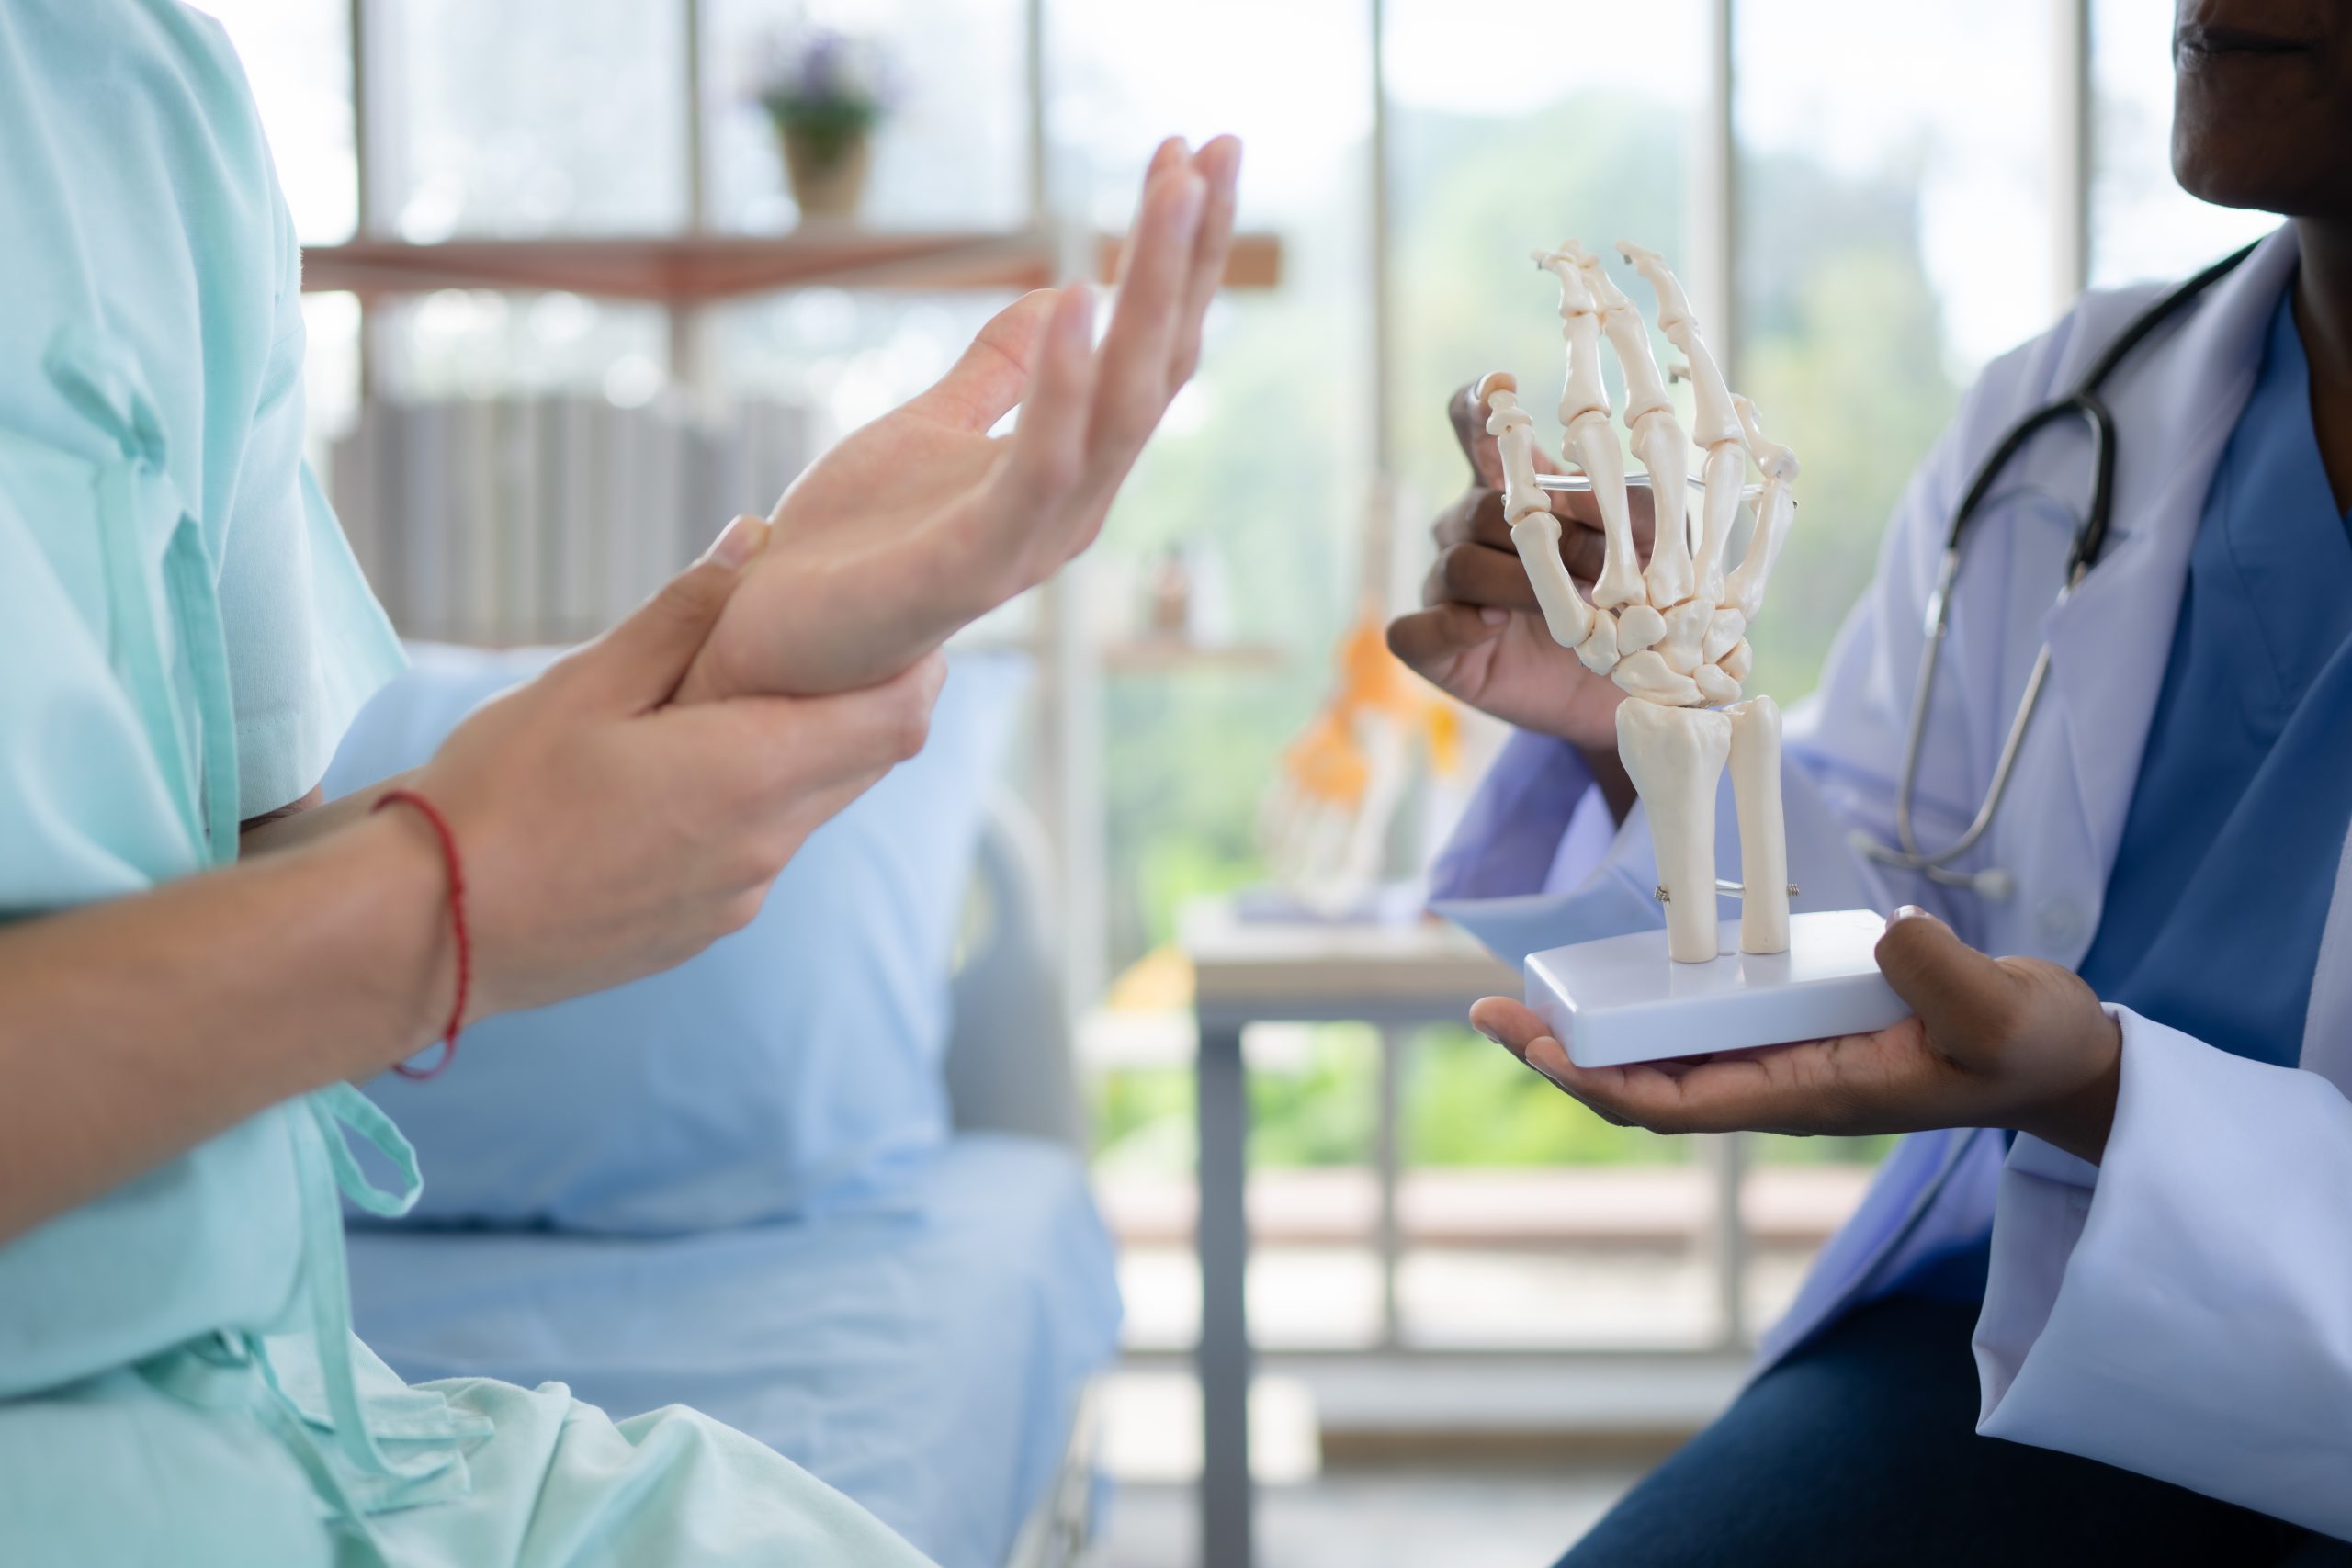 Doctor showing model of finger bones to patient in hospital. Medical and healthcare concept.